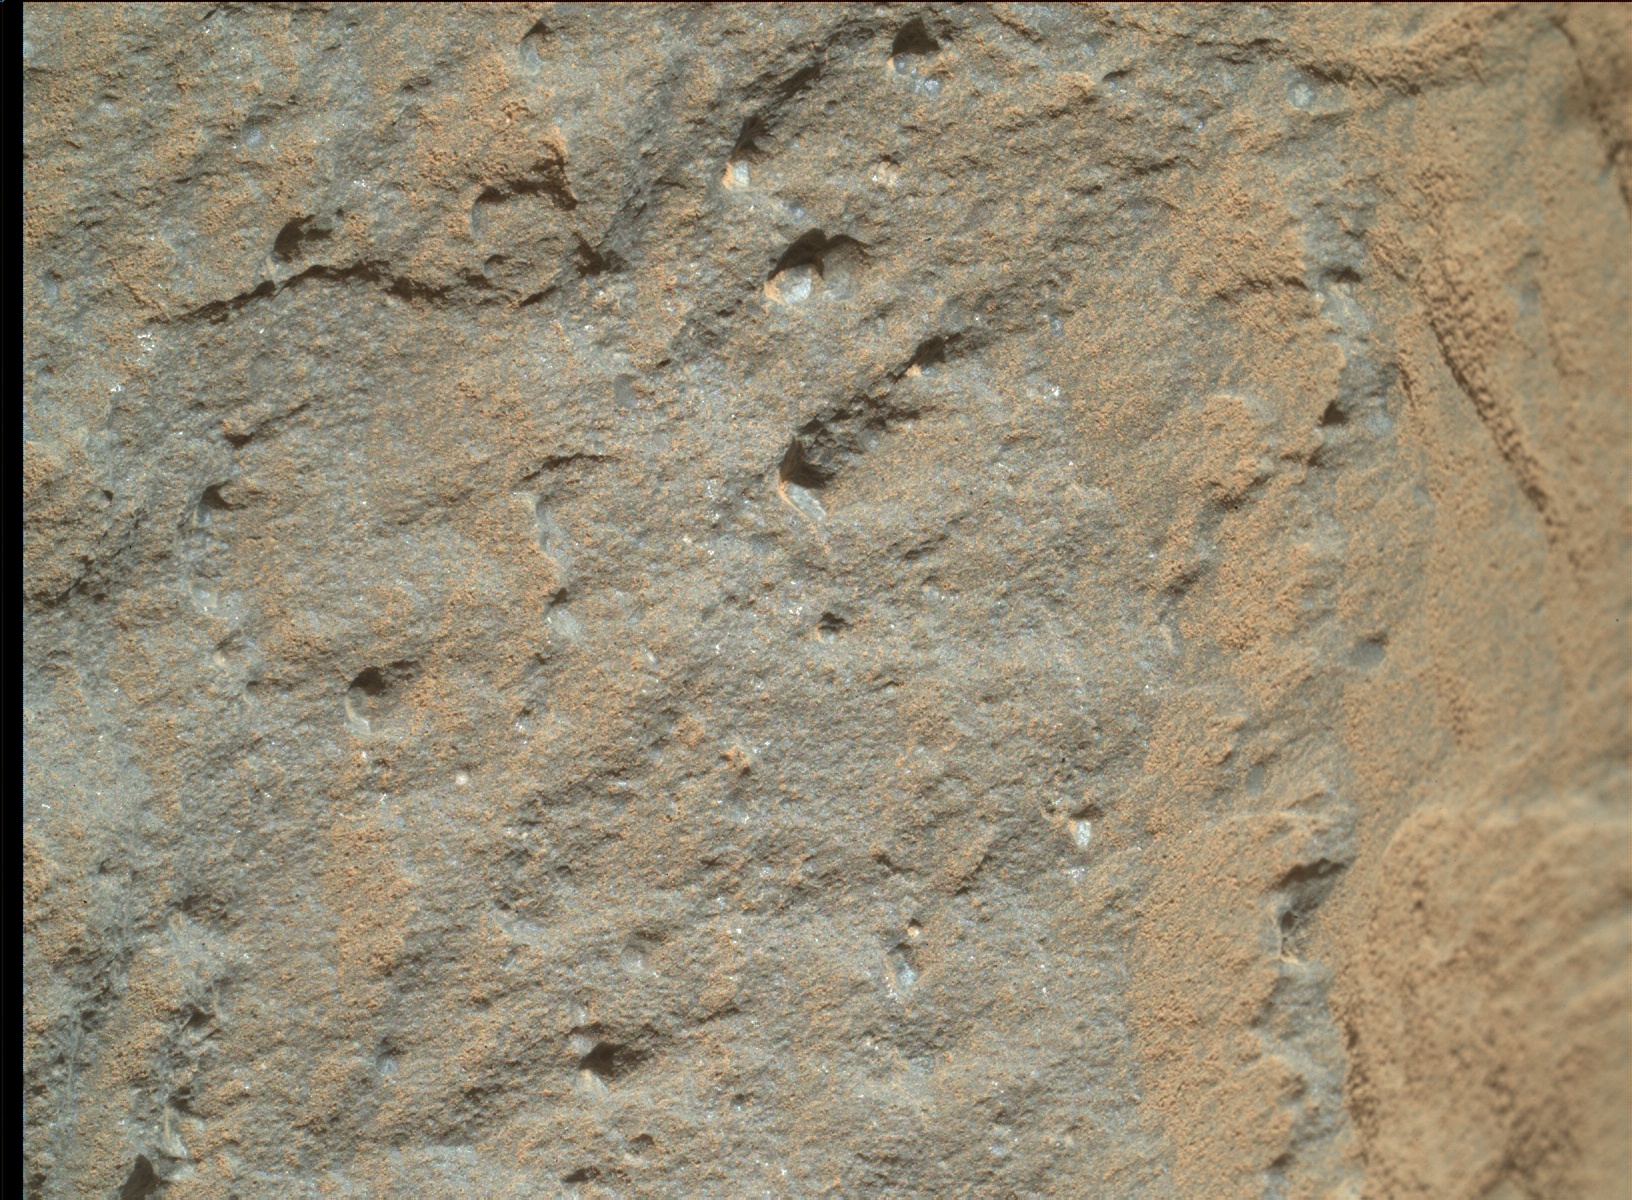 Nasa's Mars rover Curiosity acquired this image using its Mars Hand Lens Imager (MAHLI) on Sol 585